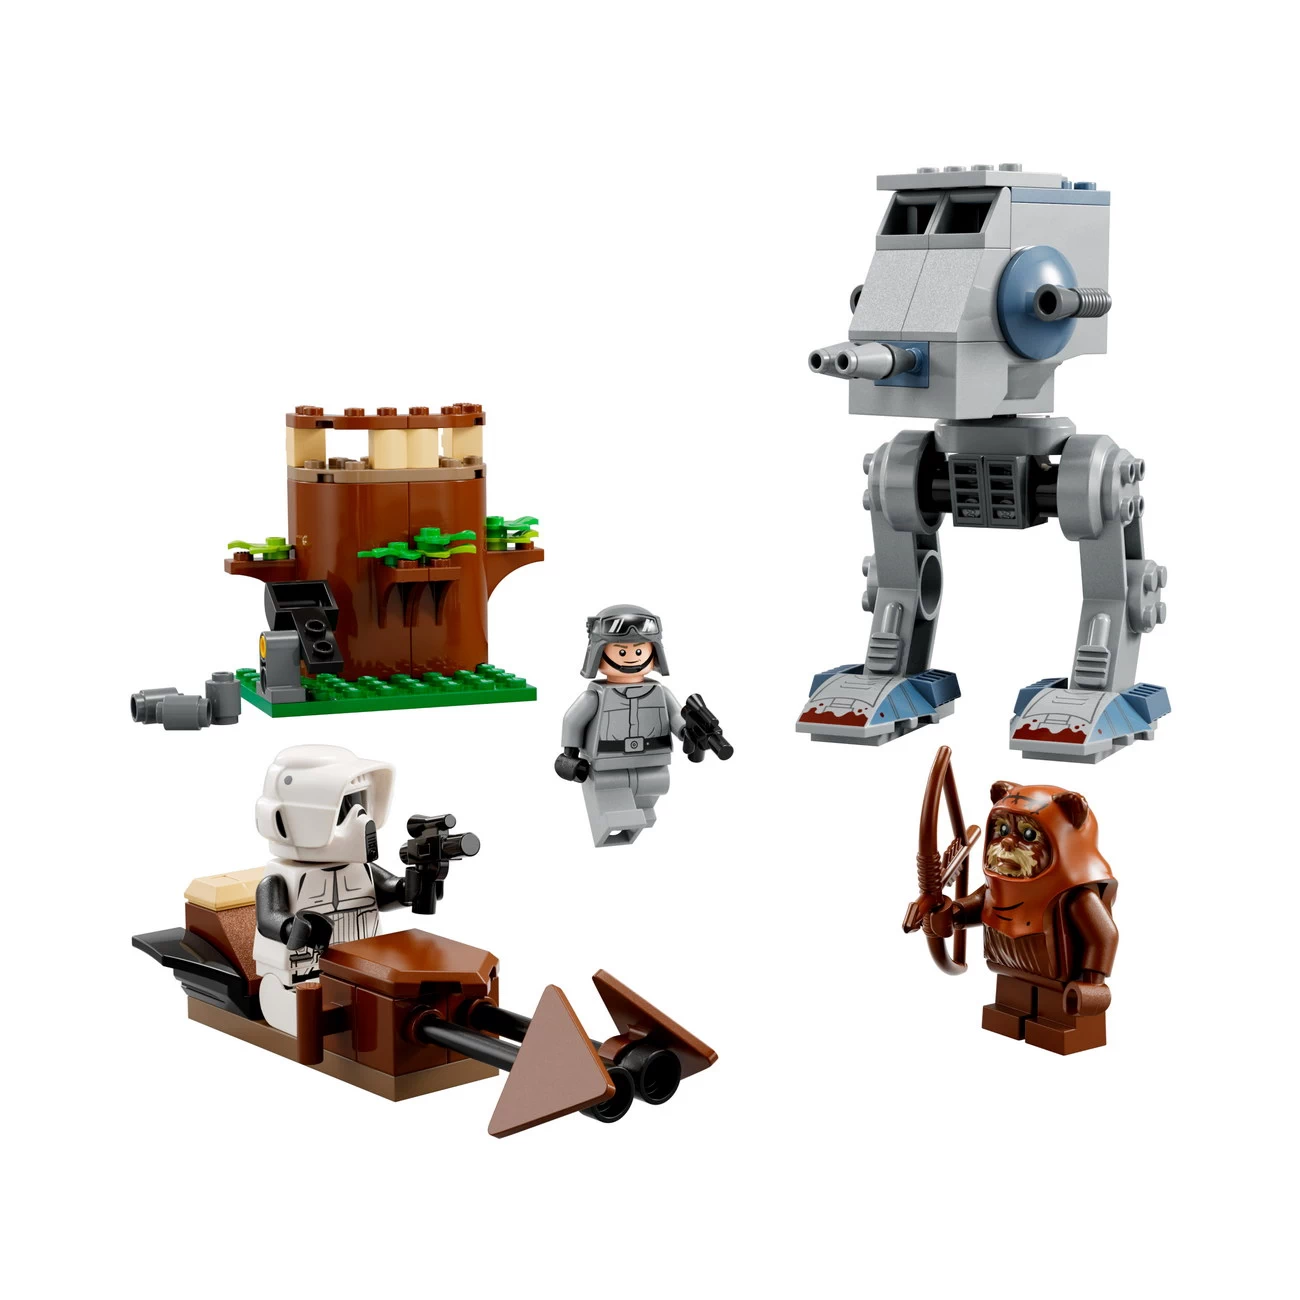 LEGO Star Wars 75332 - AT-ST